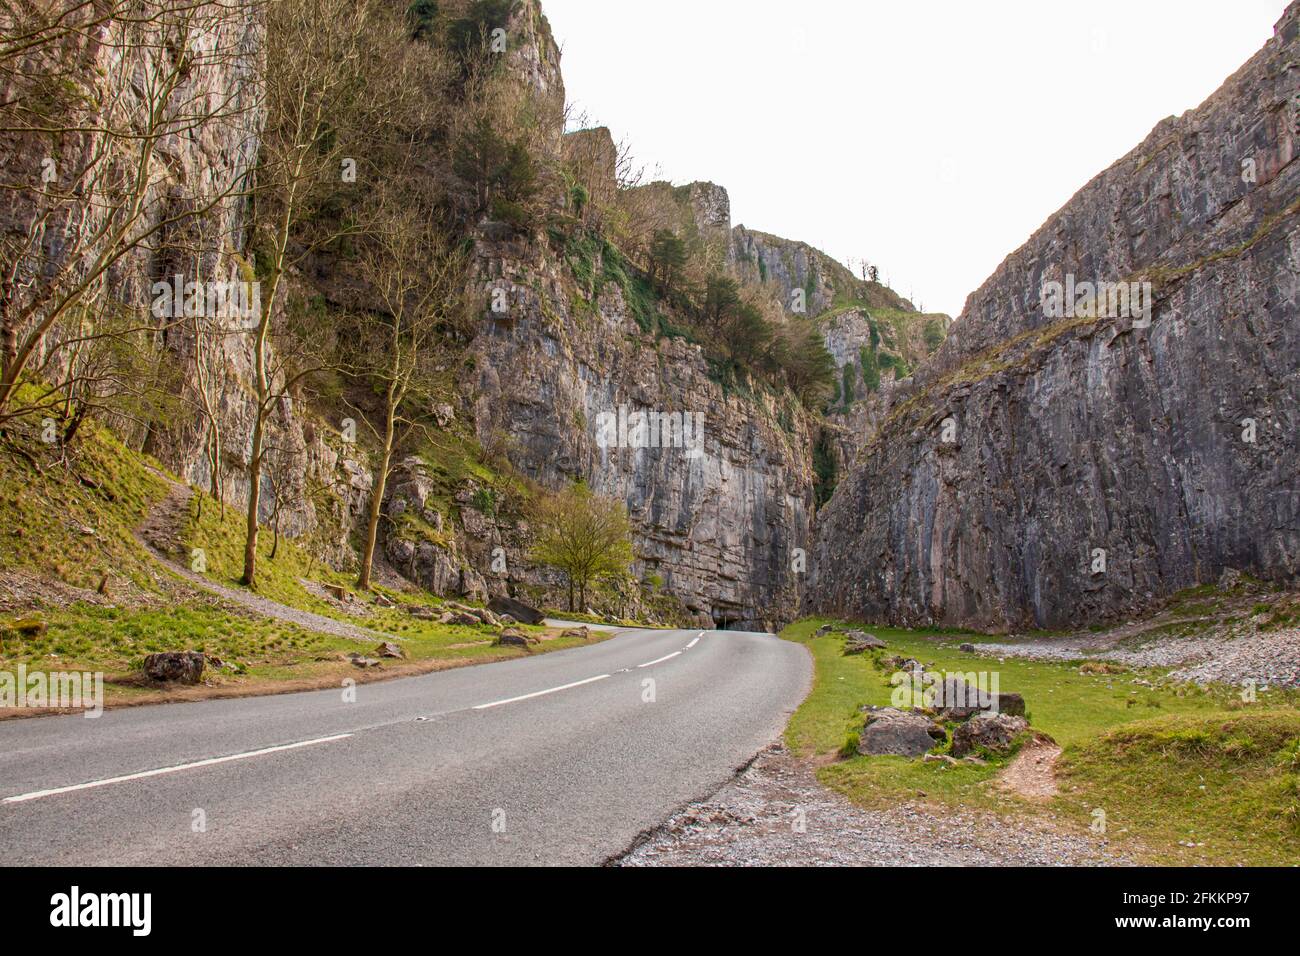 Cheddar Gorge, Mendip Hills, Somerset, England - Beautiful view from the mountains on a sunny day Stock Photo